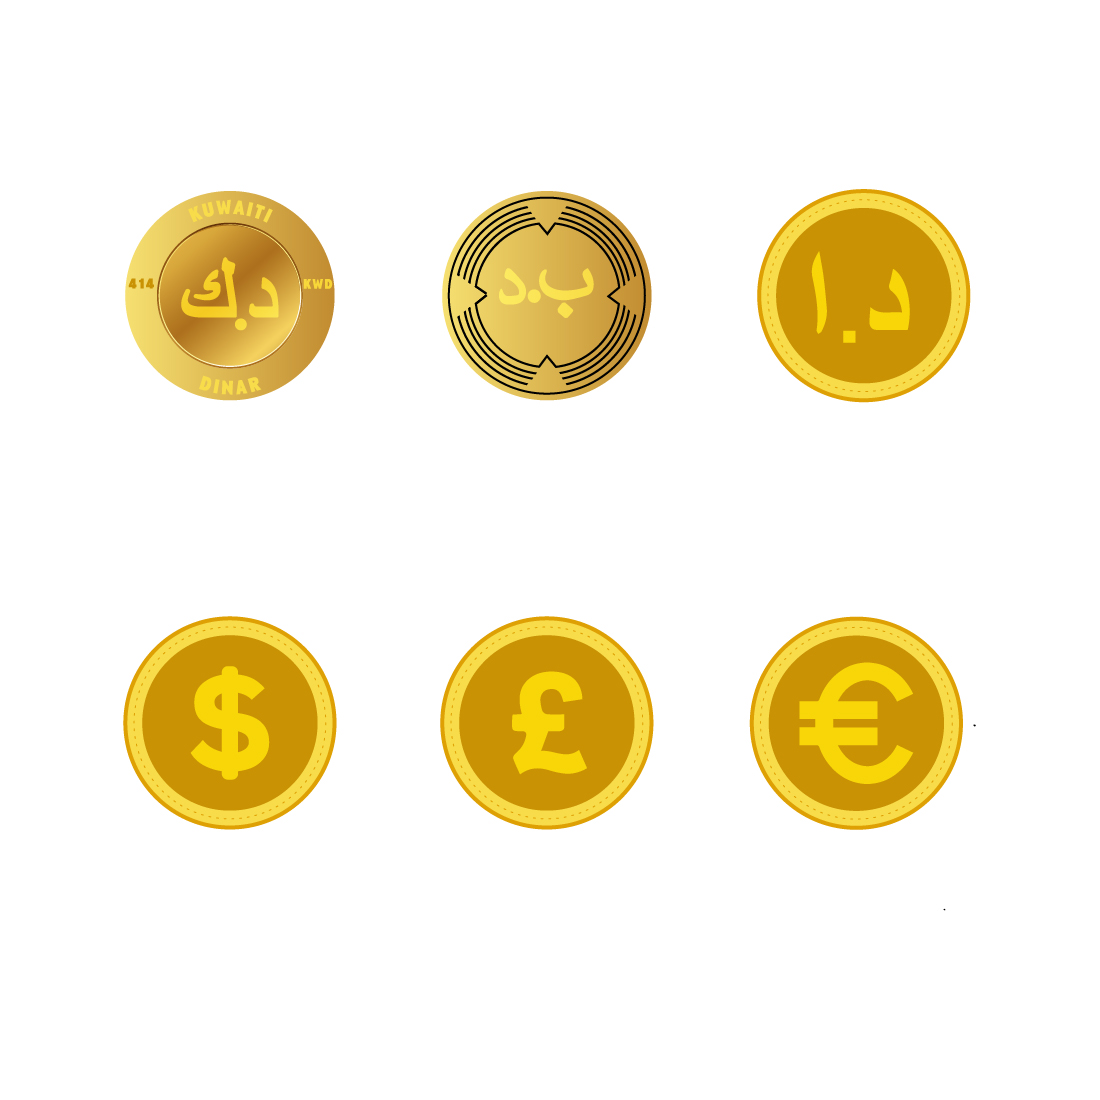 Valuable currency preview image.